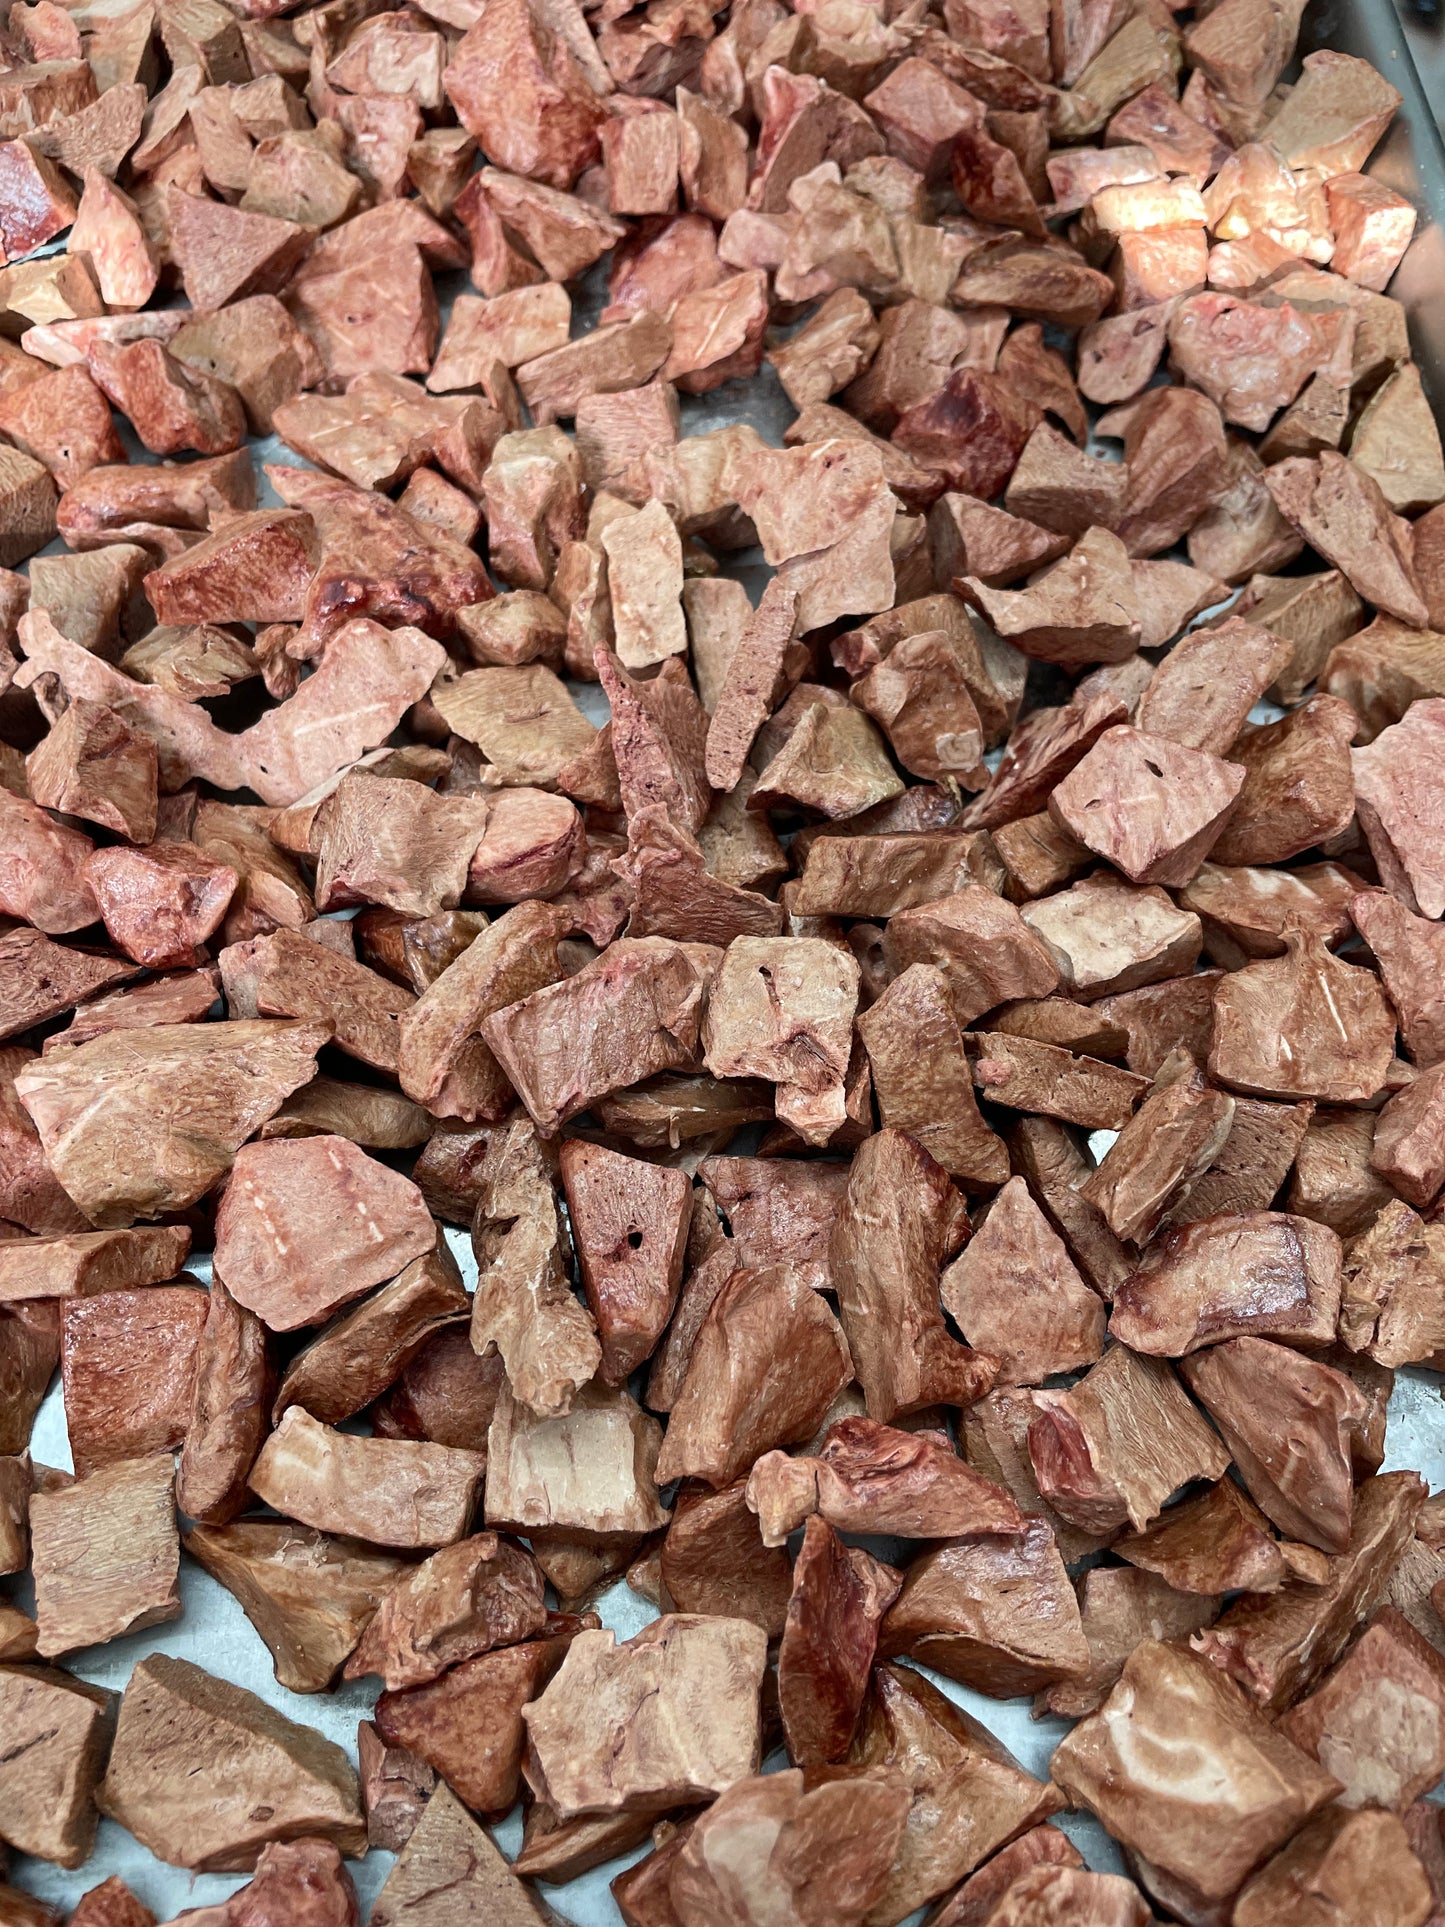 Freeze Dried Bison Liver Pet Treats made with organic all natural 100% Bison Liver, for your cats and dogs. Free of Glycerine, Gluten, Grain & Preservatives.